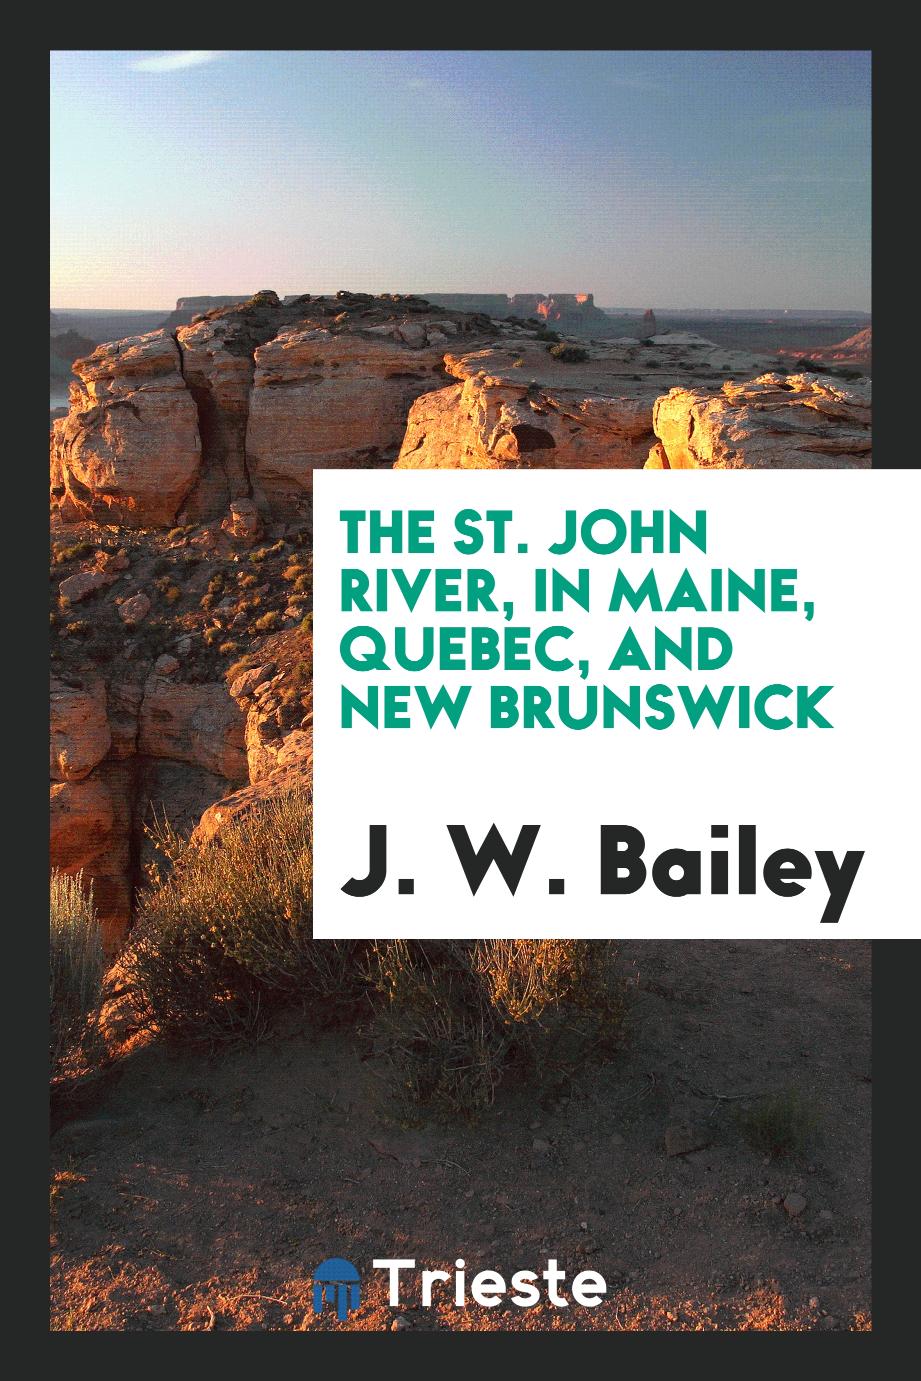 The St. John River, in Maine, Quebec, and New Brunswick